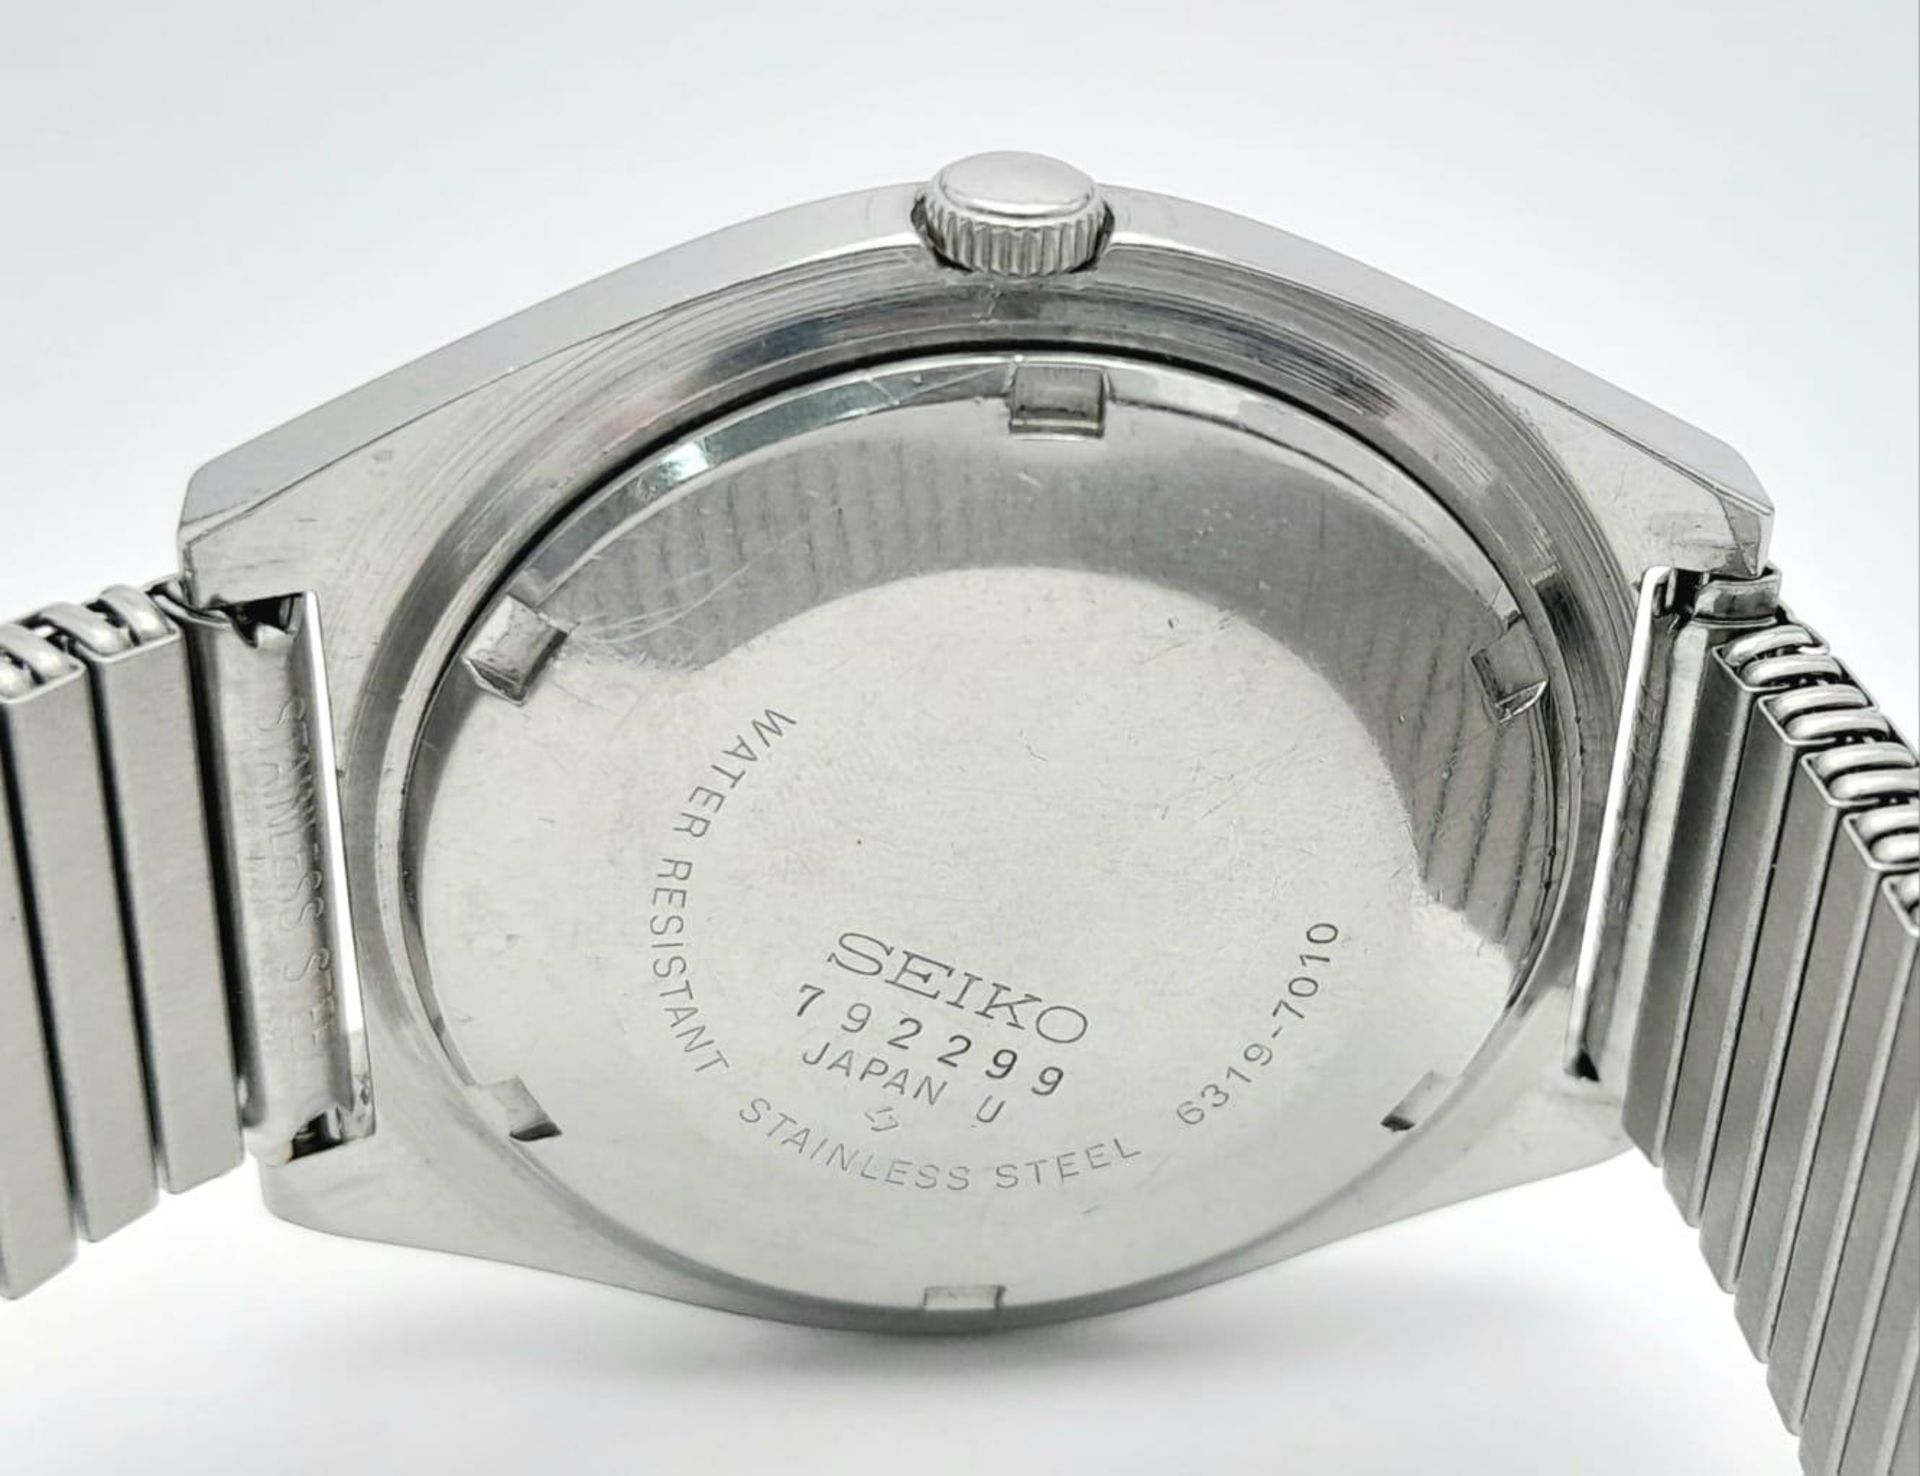 A Vintage Seiko 5 Automatic Gents Watch. Two tone stainless steel bracelet and case - 37mm. Metallic - Image 5 of 5